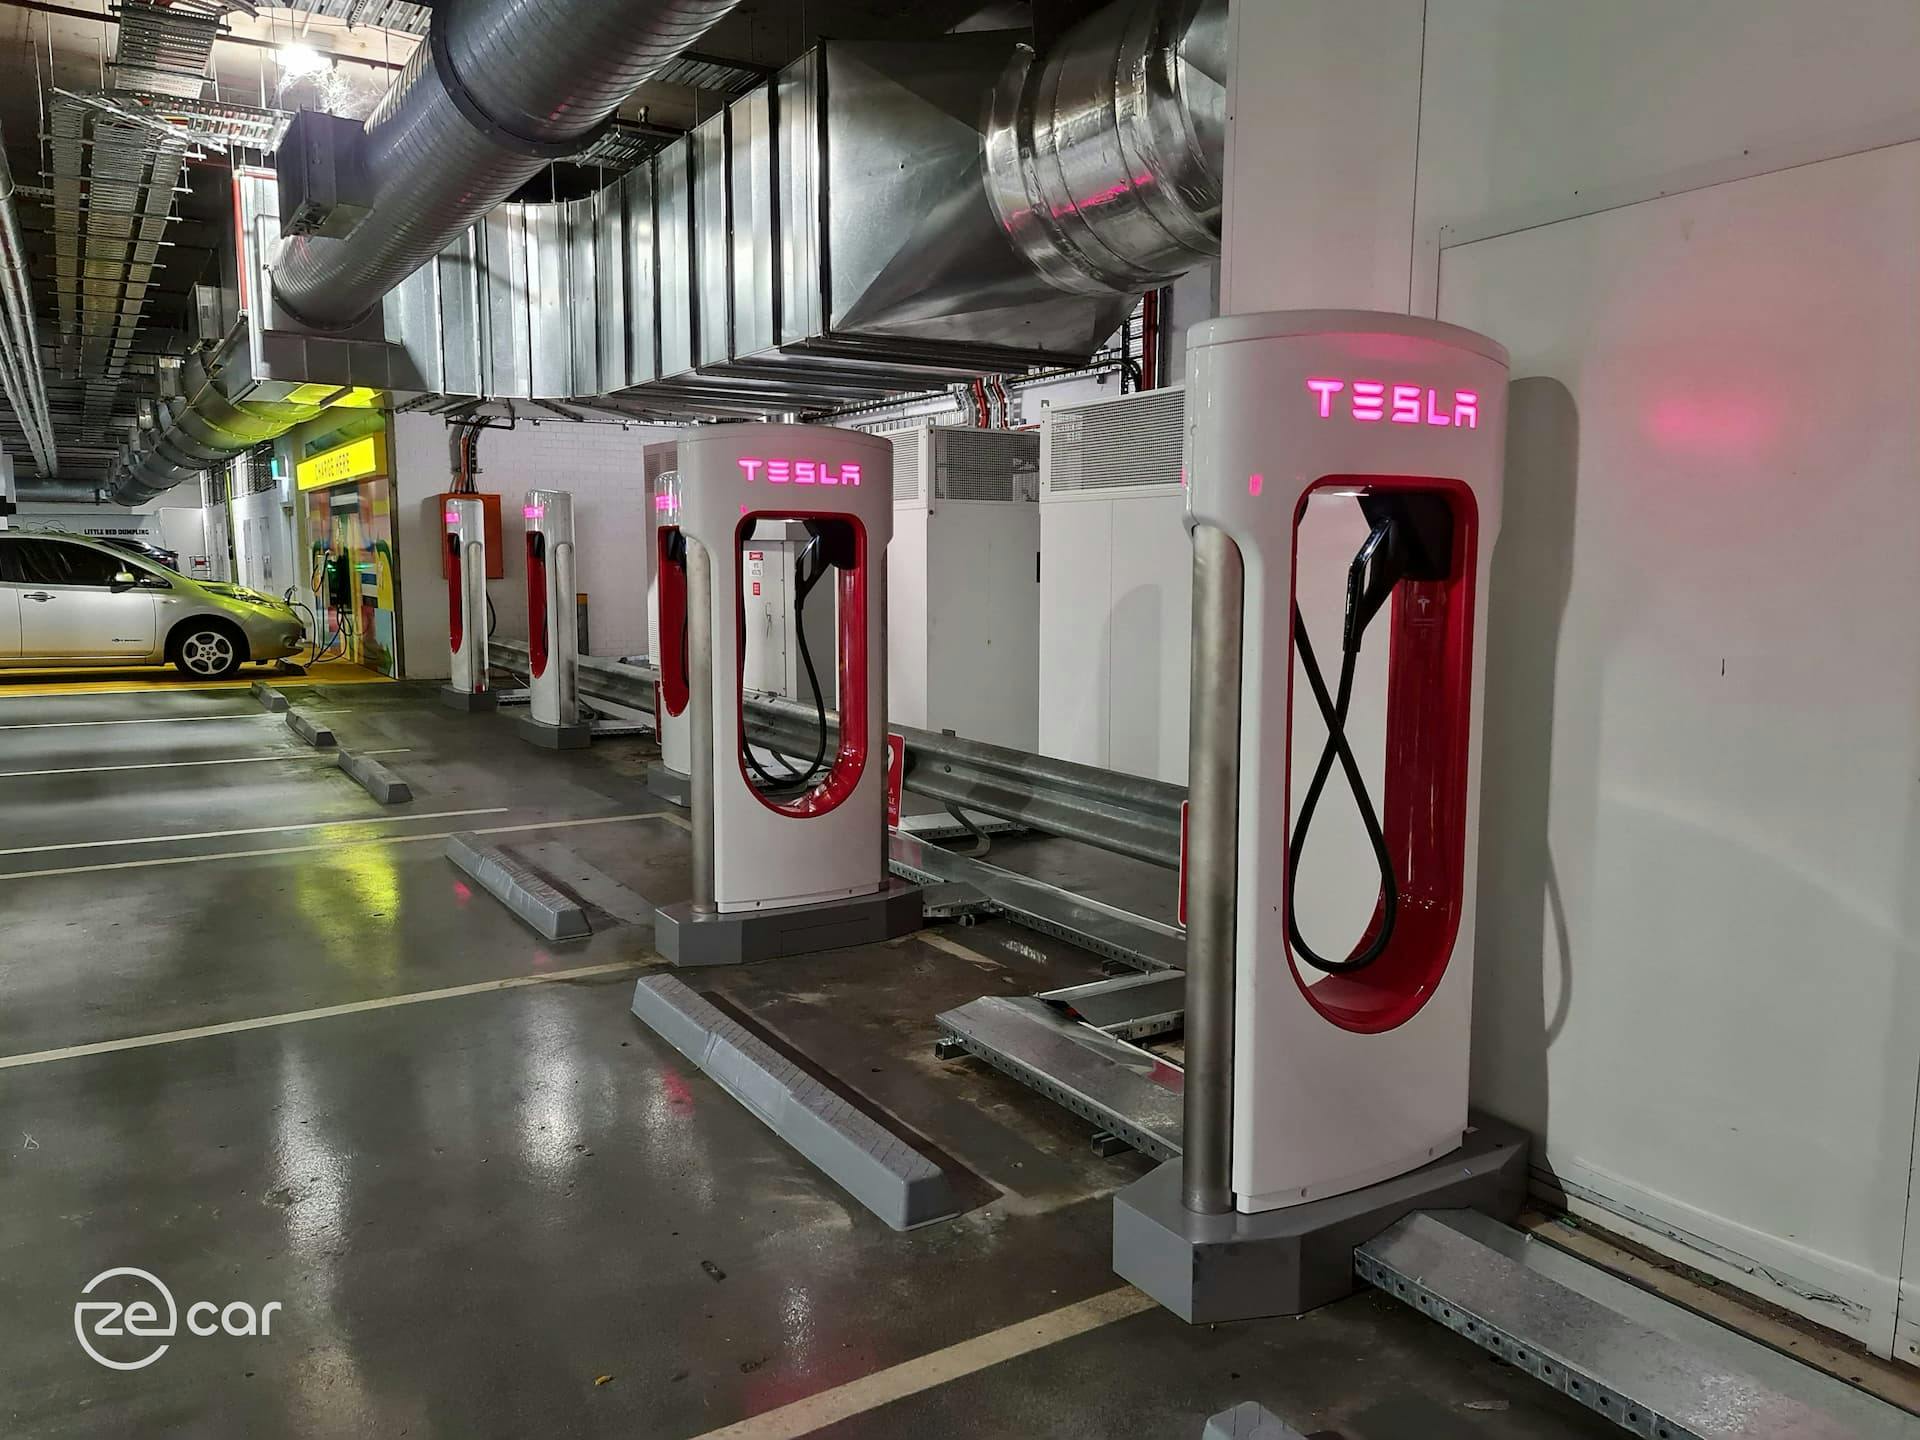 Six Tesla Superchargers next to charging Nissan Leaf in Toombul car park